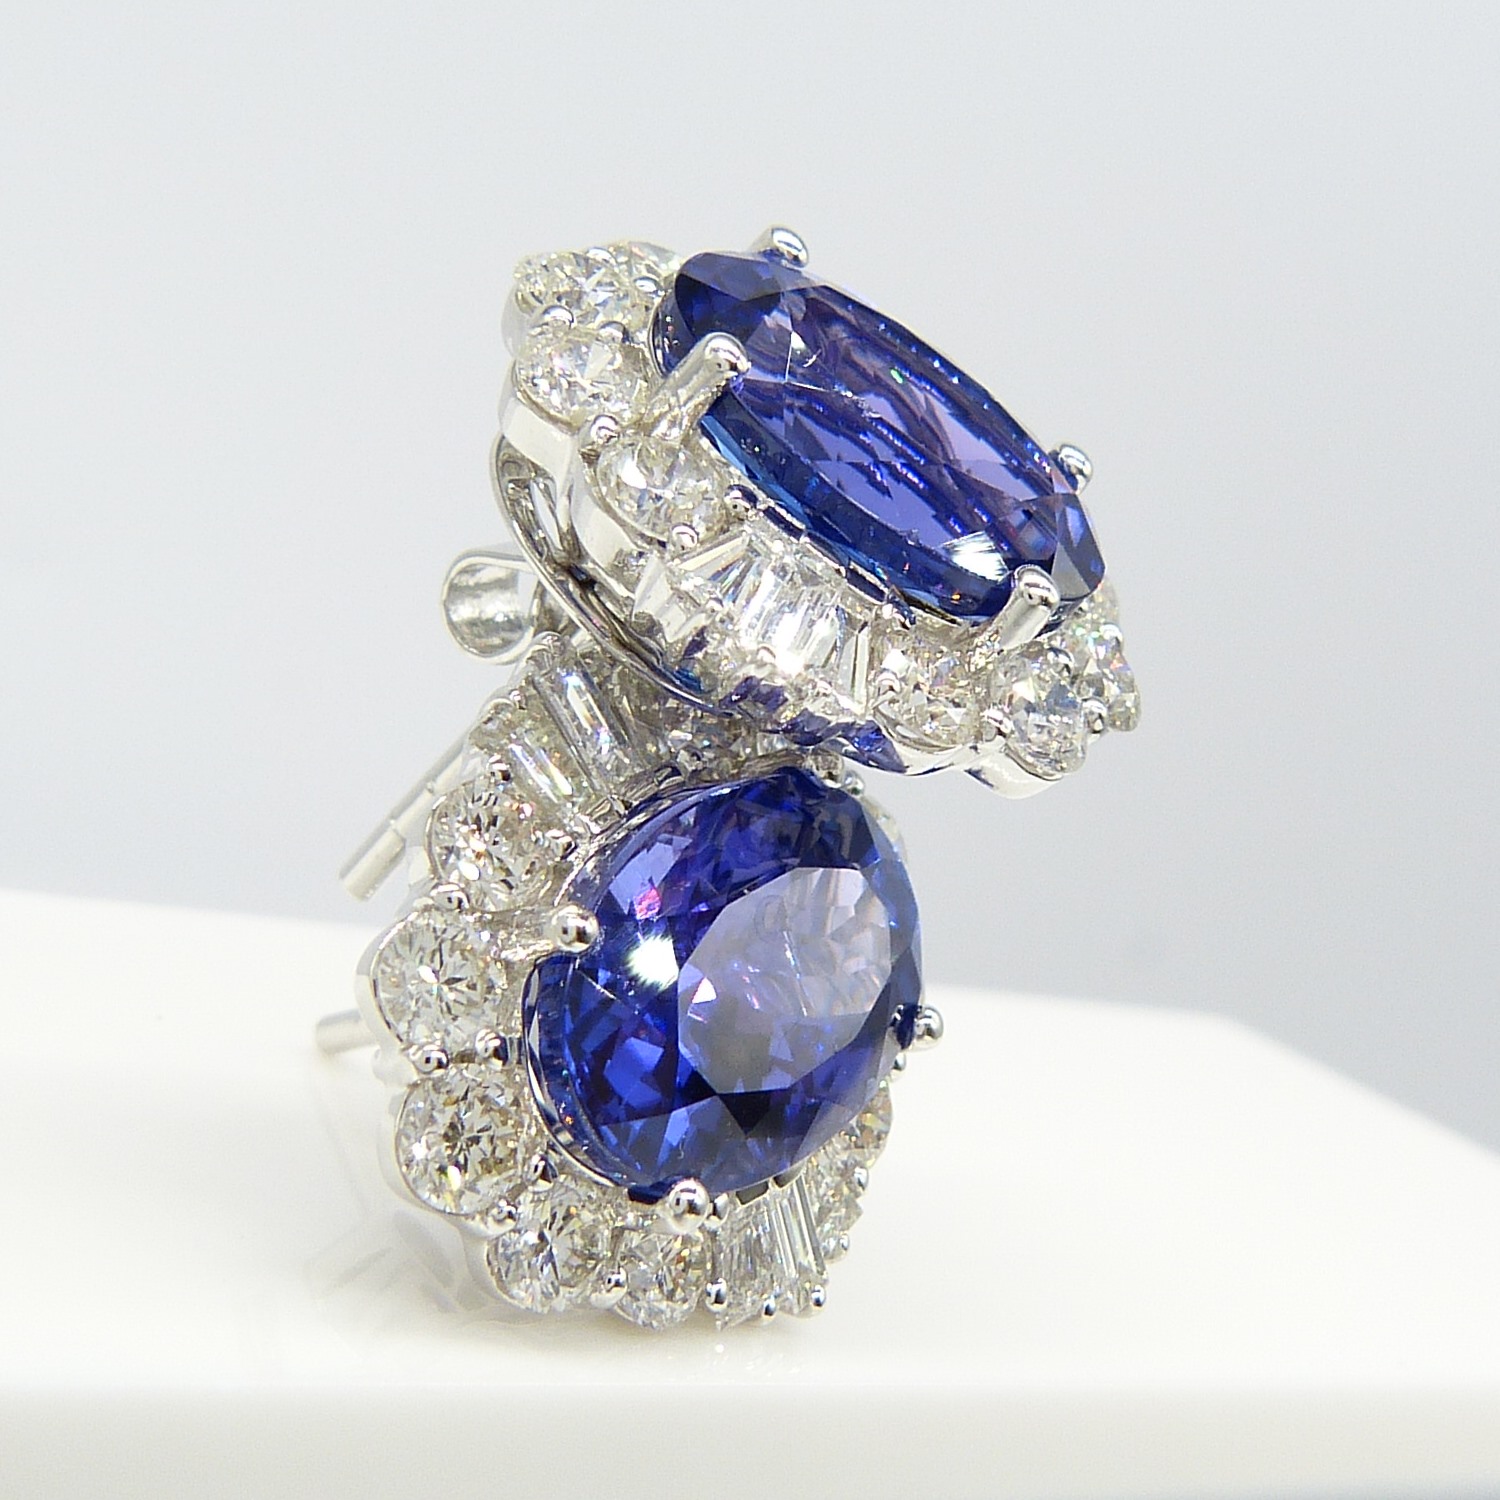 A large pair of loupe-clean tanzanite and diamond cluster earrings in 18ct white gold, certificated - Image 8 of 9